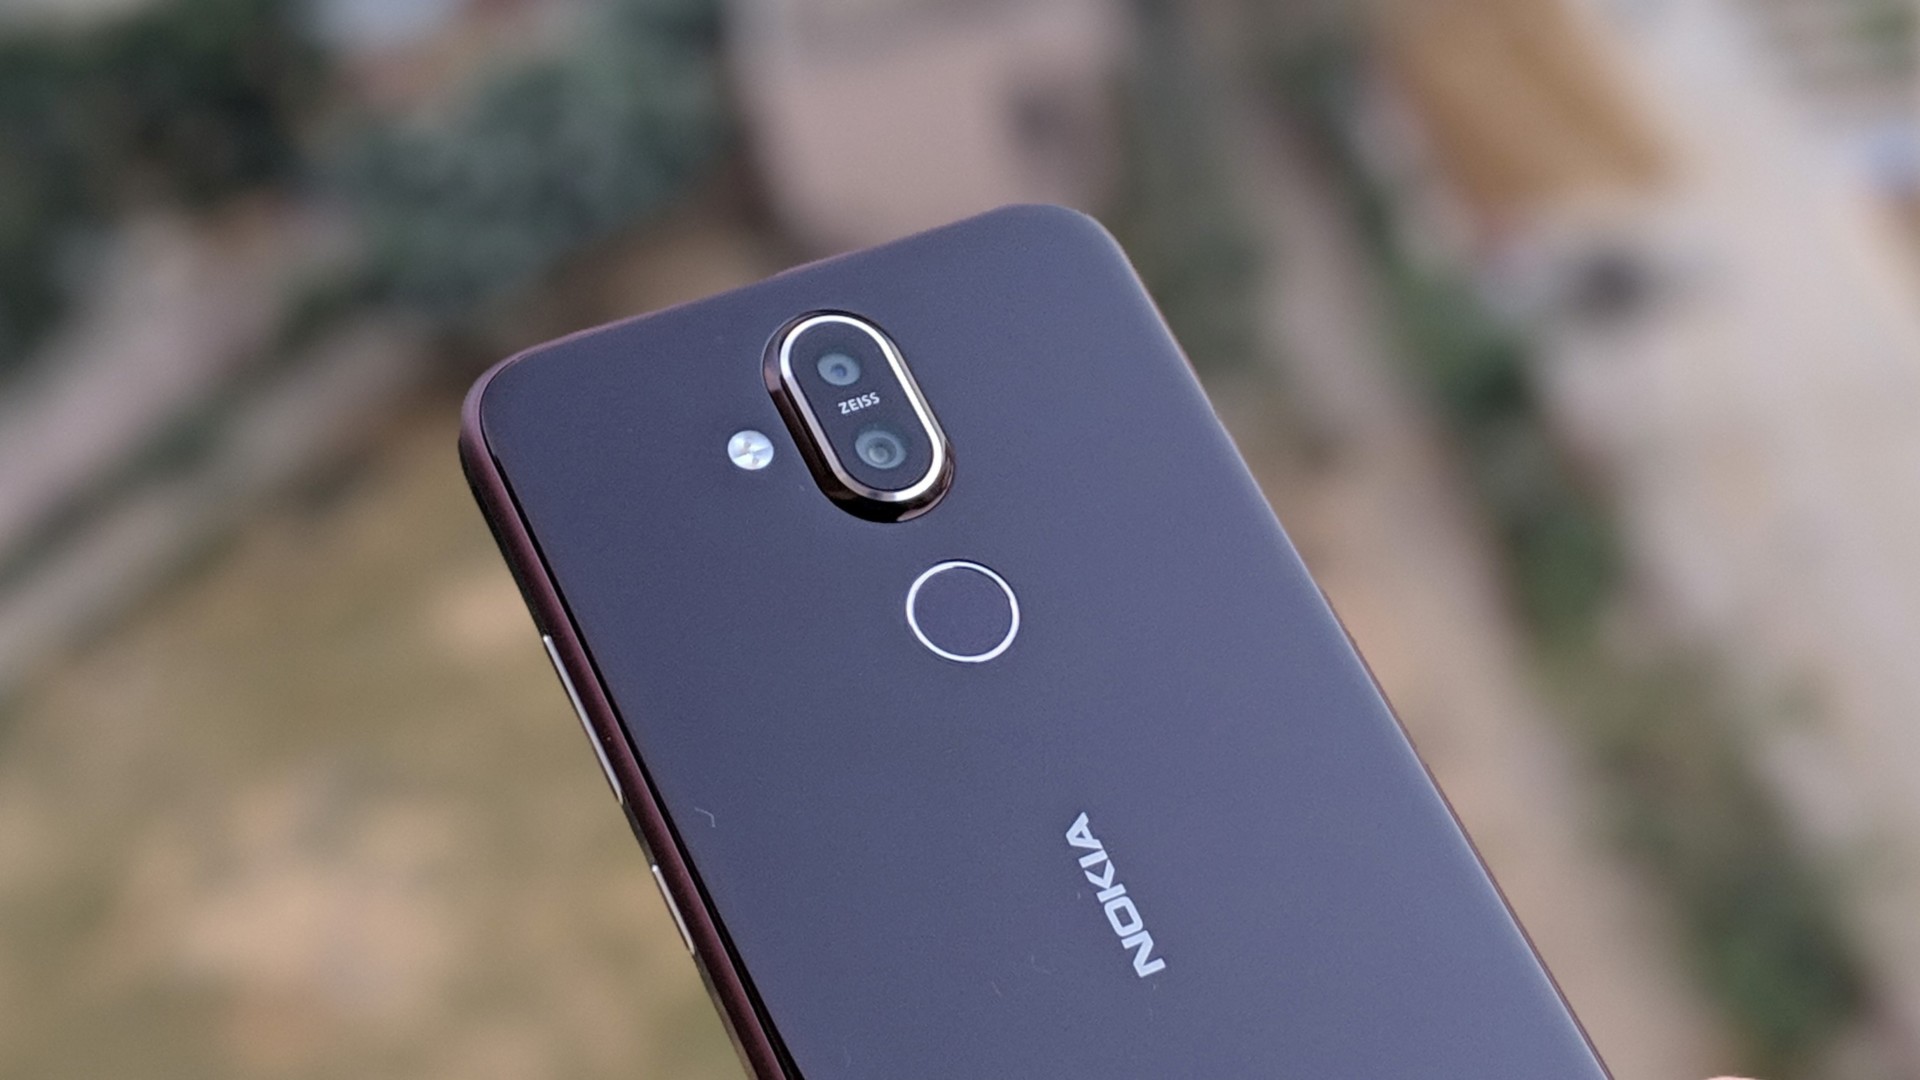 A more affordable Nokia 5G phone is coming in 2020.